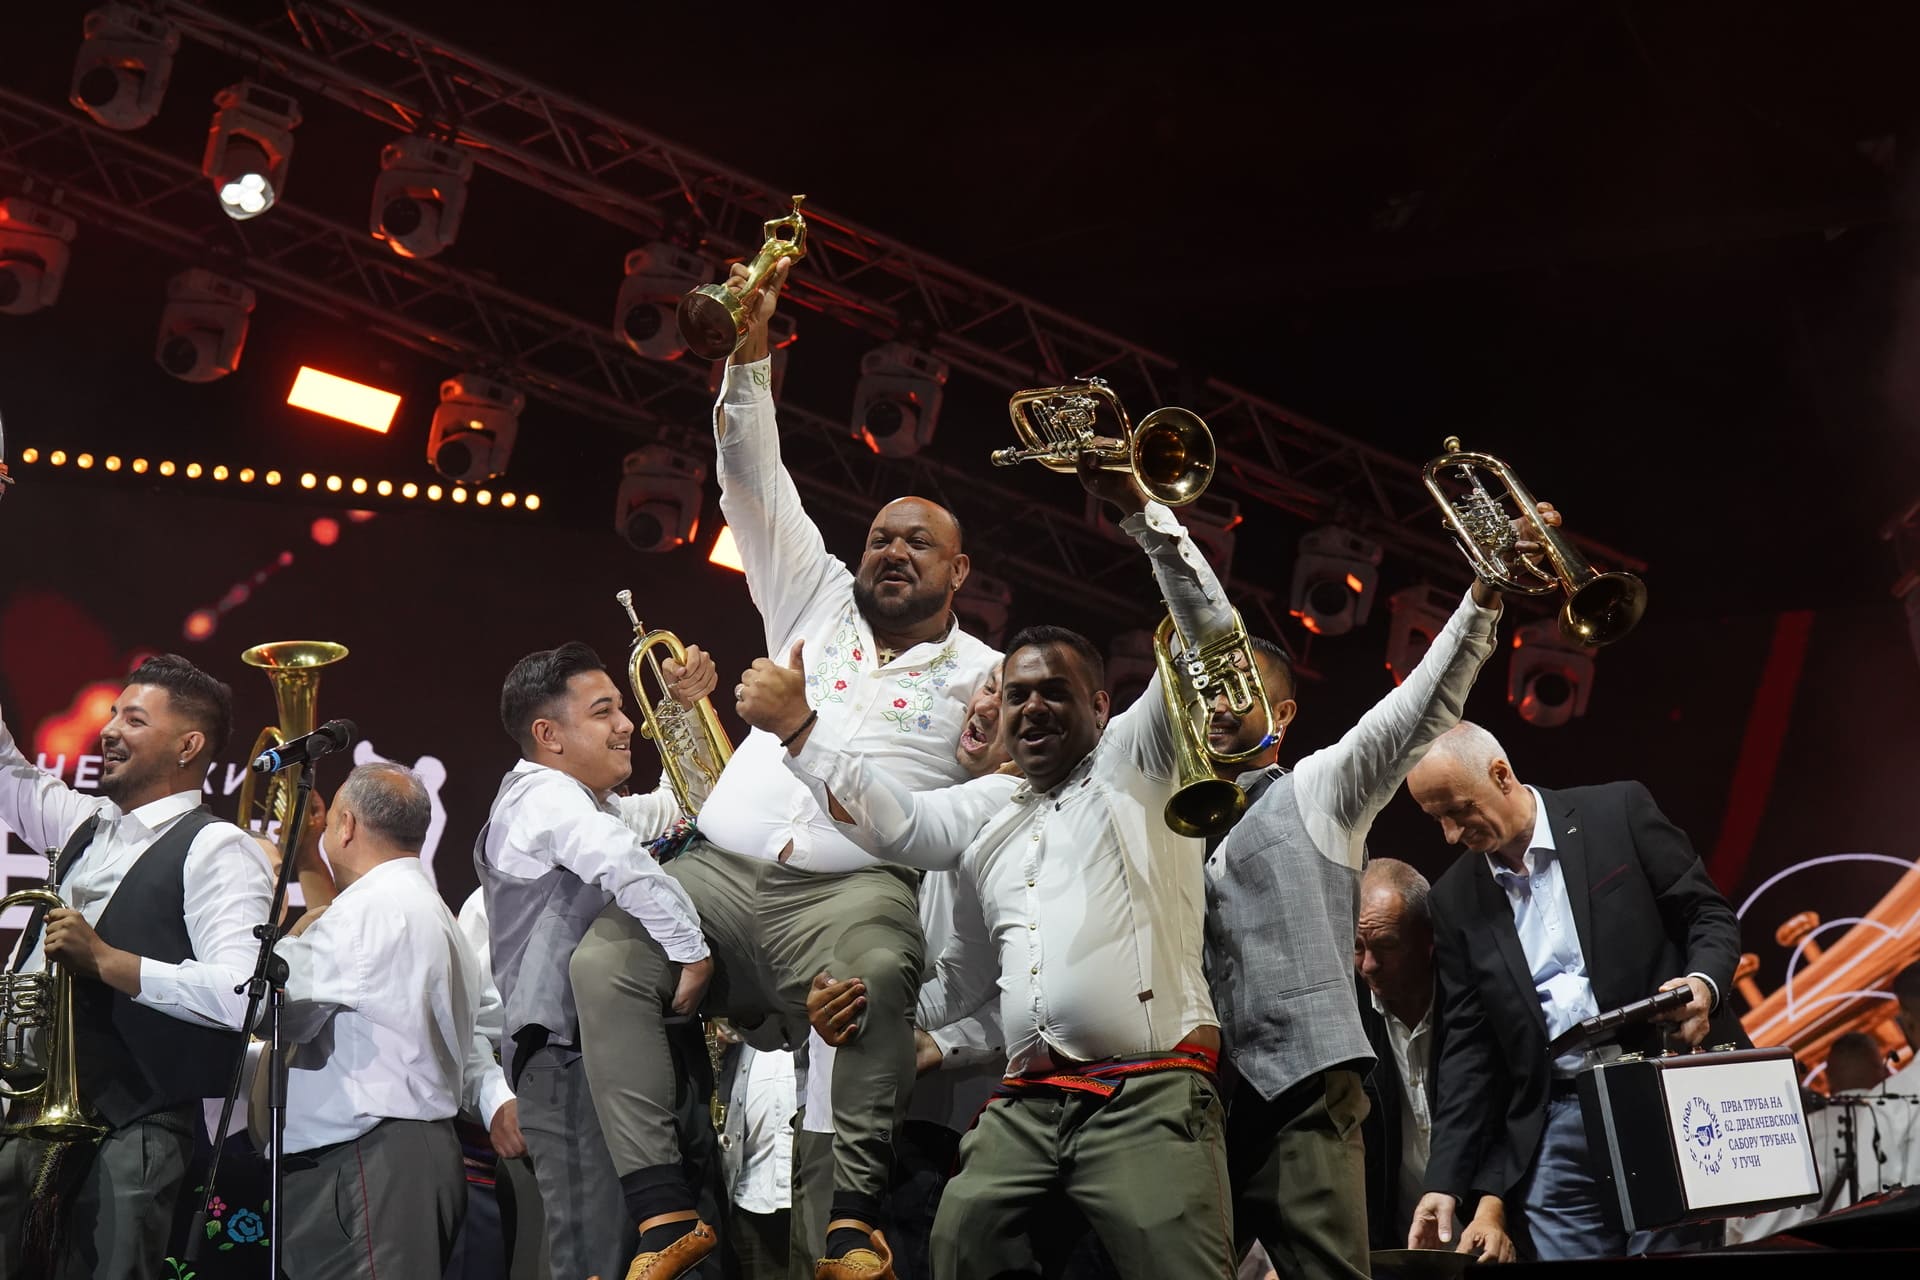 Announced winners of the 62nd Dragačevski Assembly of trumpeters